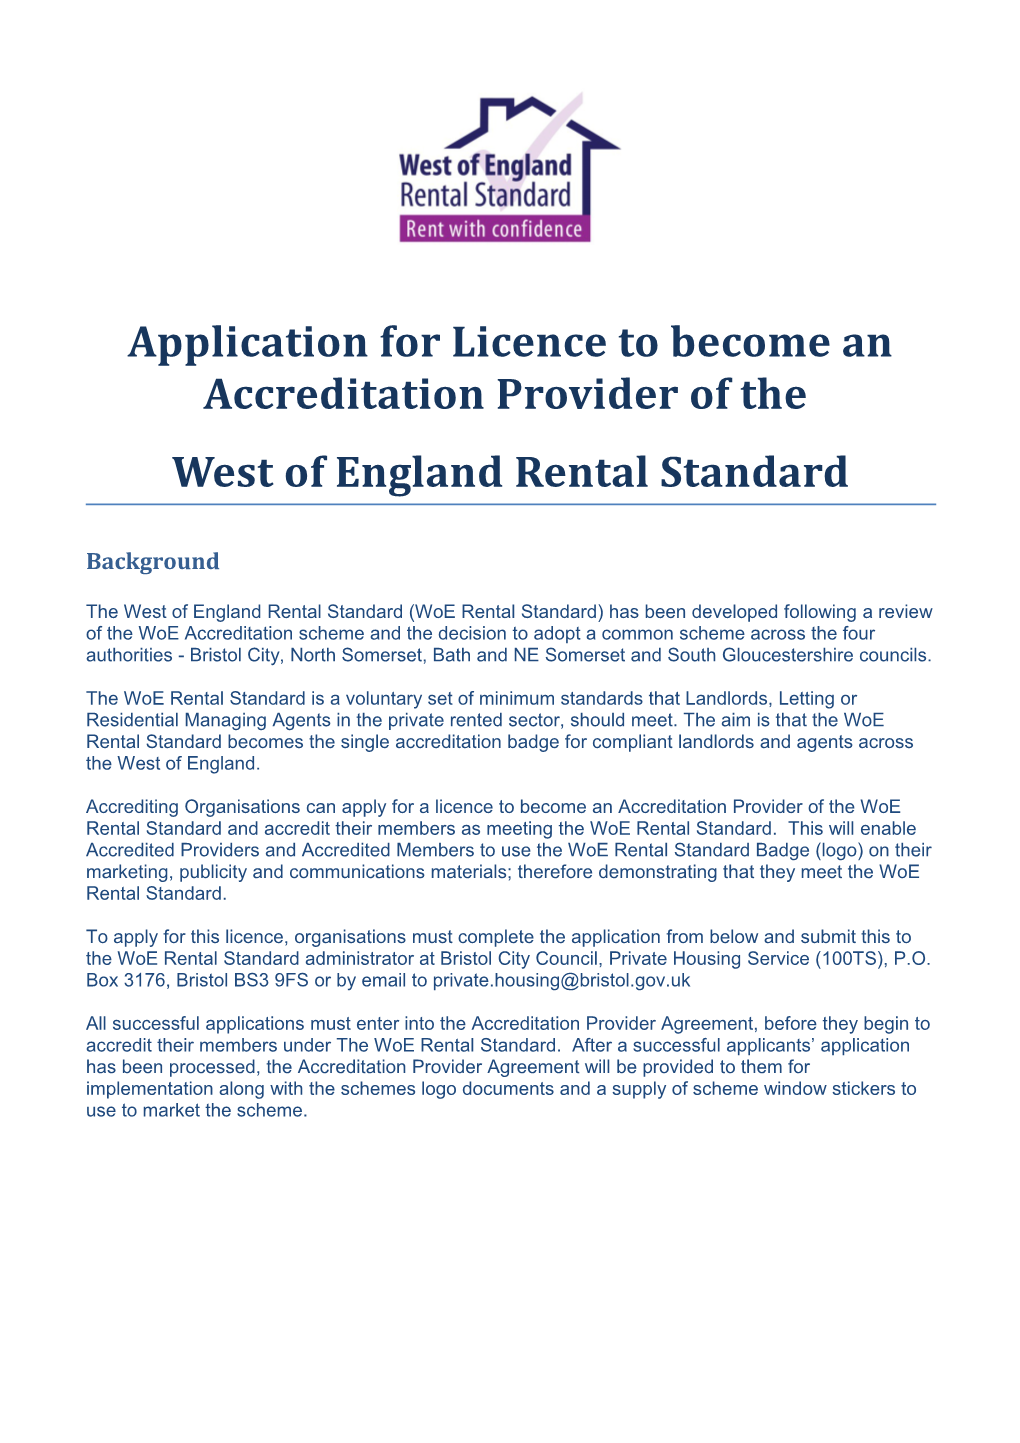 Application for Licence to Become an Accreditation Provider of The